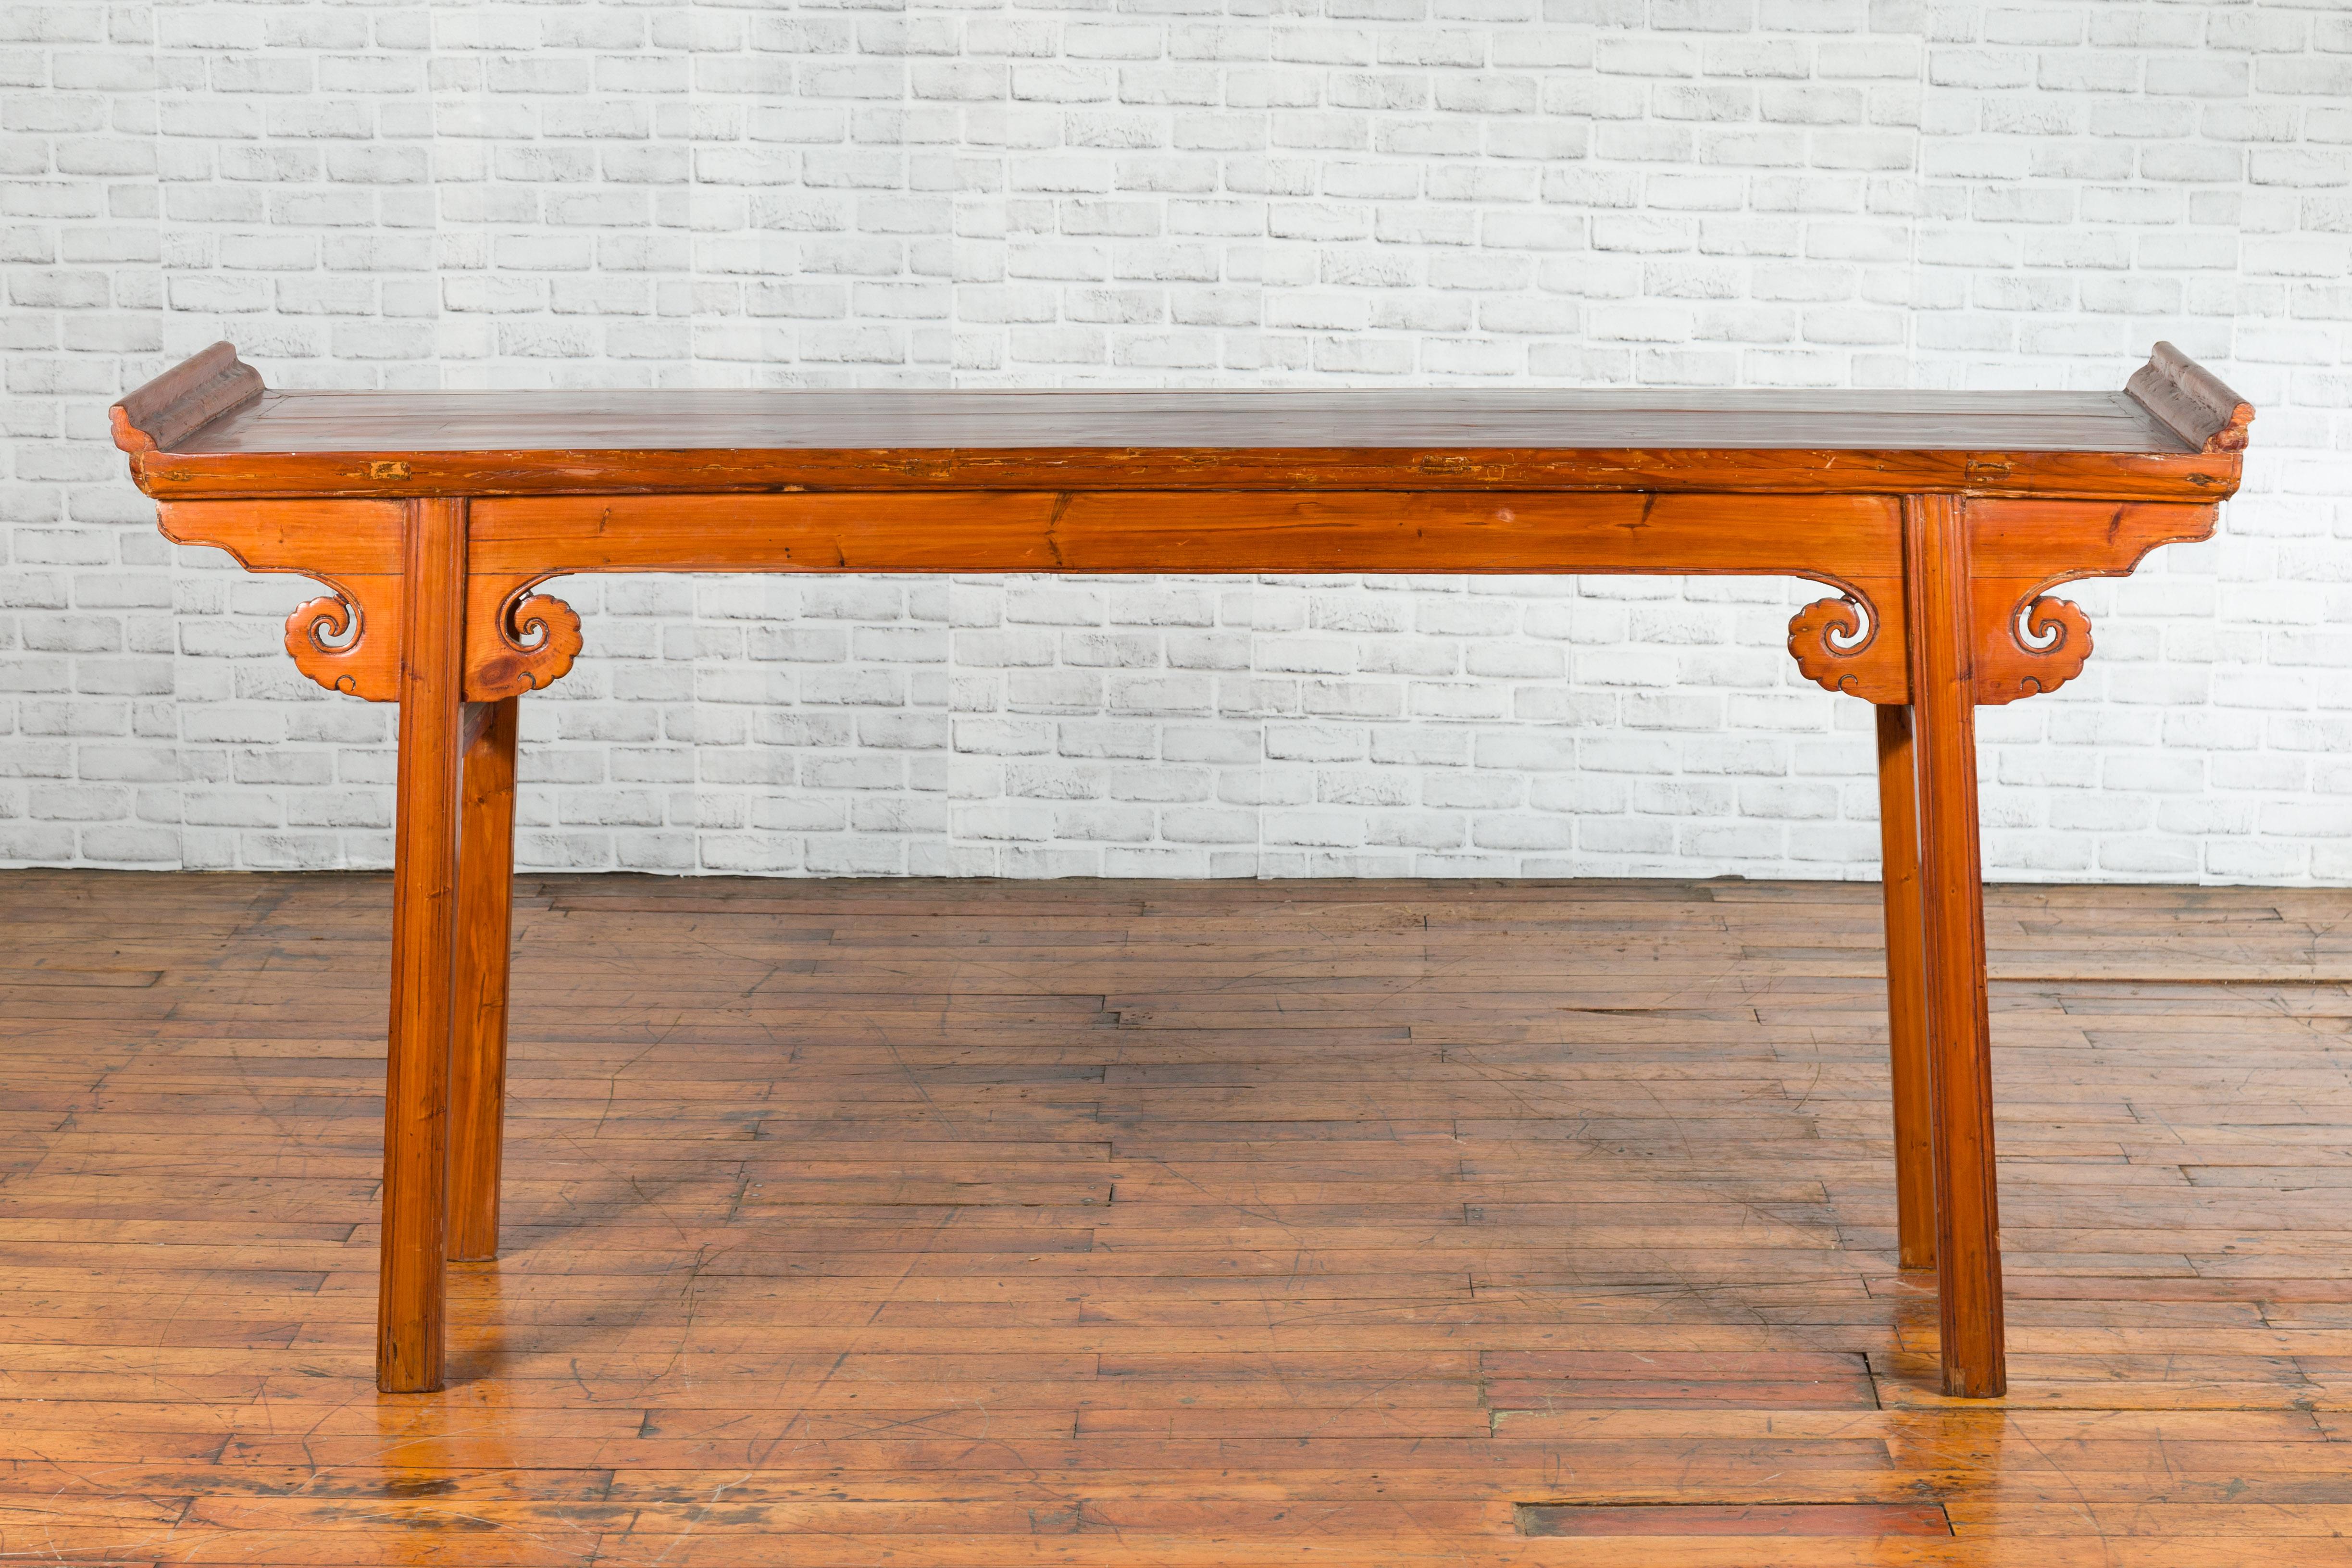 A Chinese Qing Dynasty period elmwood altar table from the 19th century with unusual patina and scrolling motifs. Created in China during the 19th century, this altar table attracts our attention with its vivid patina and elegant lines. A